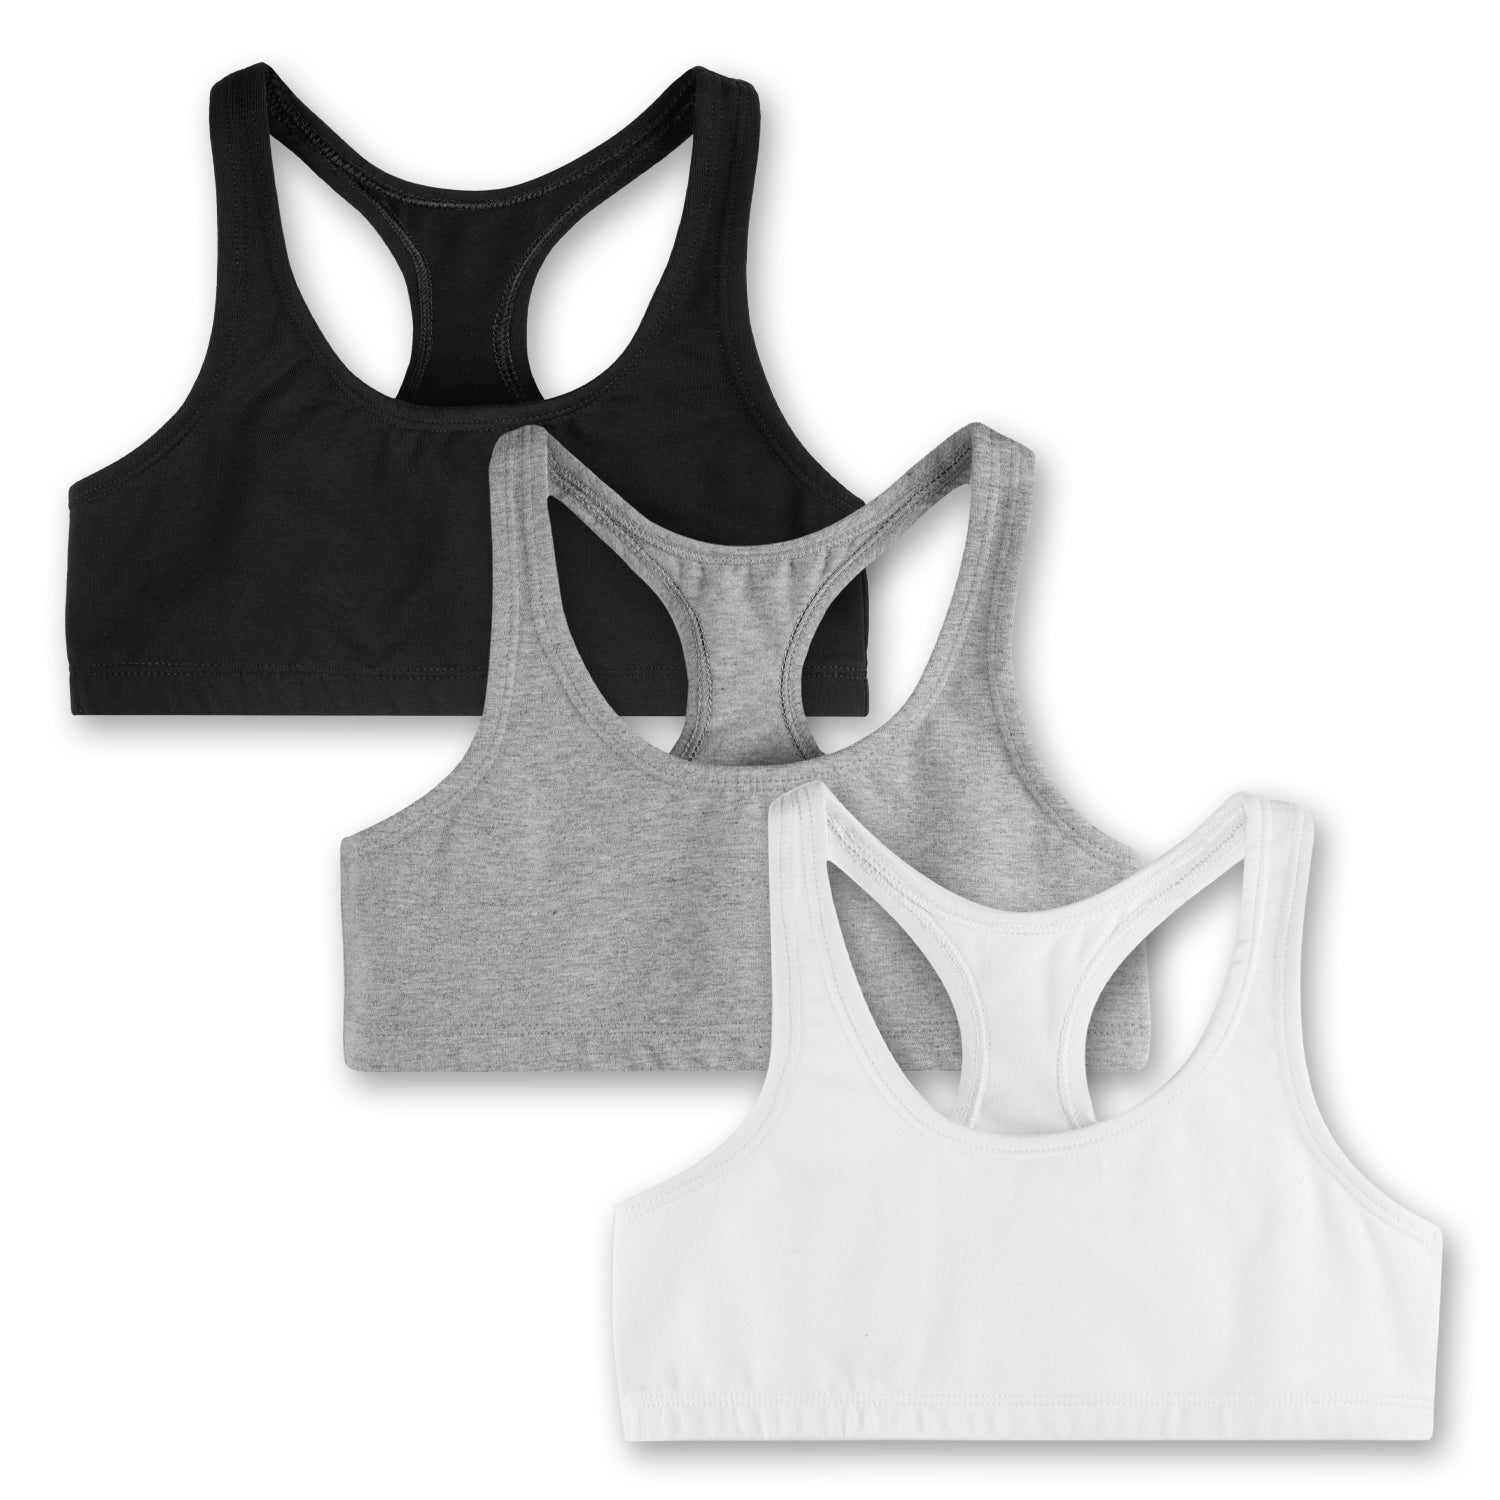 3 for $20 DSG Youth Girls Racerback Watercolor Sports Bra Size